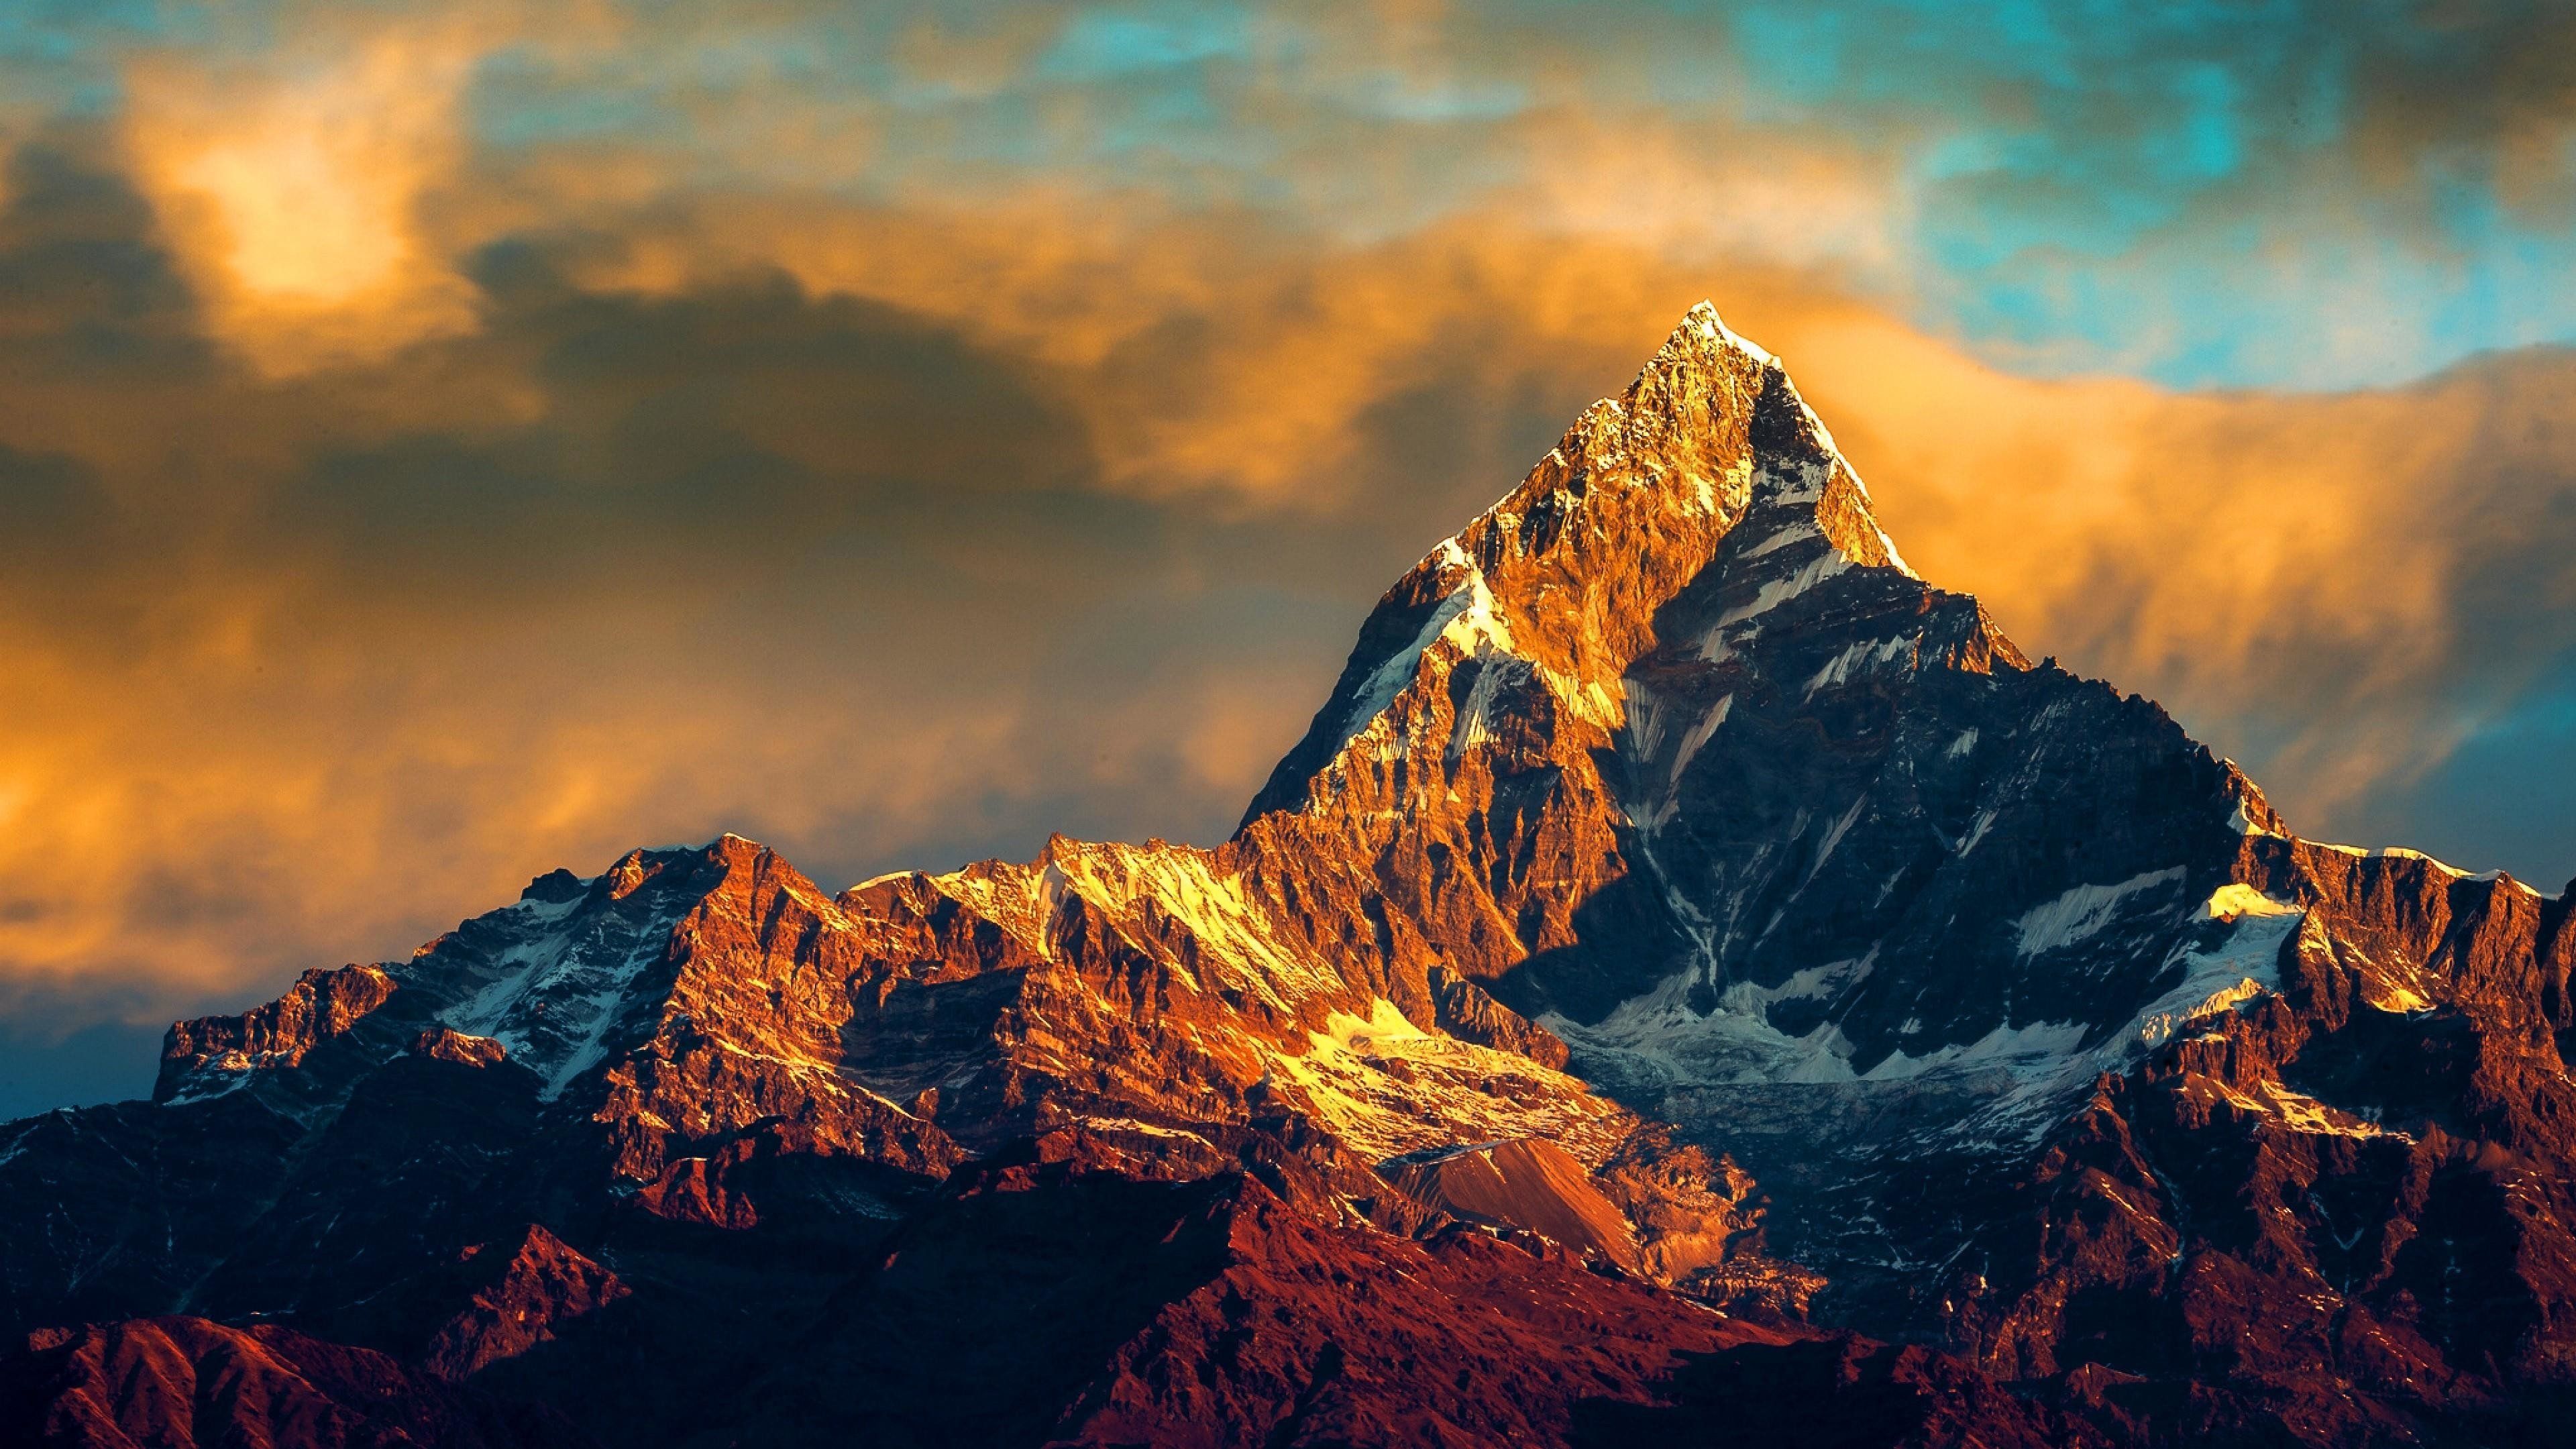 Nepal high quality wallpaper 1920x1080. | Nepal, Wallpaper, Places to go